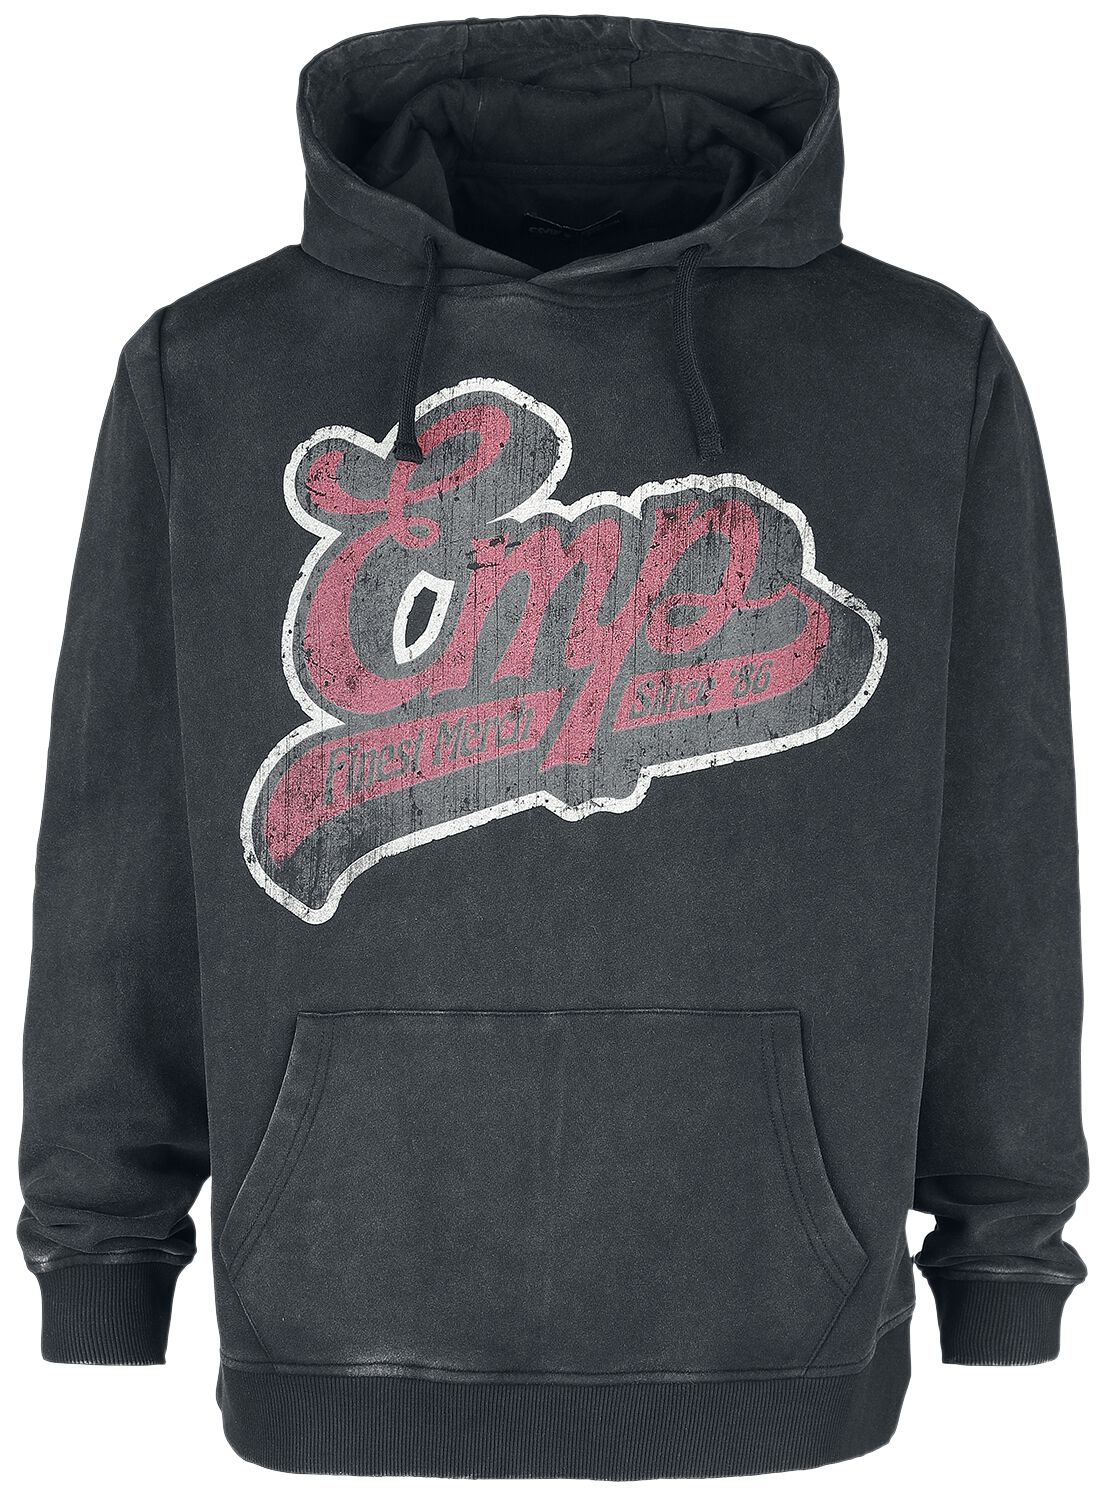 EMP Stage Collection Kapuzenpullover mit Vintage EMP- Logo Kapuzenpullover schwarz in L von EMP Stage Collection